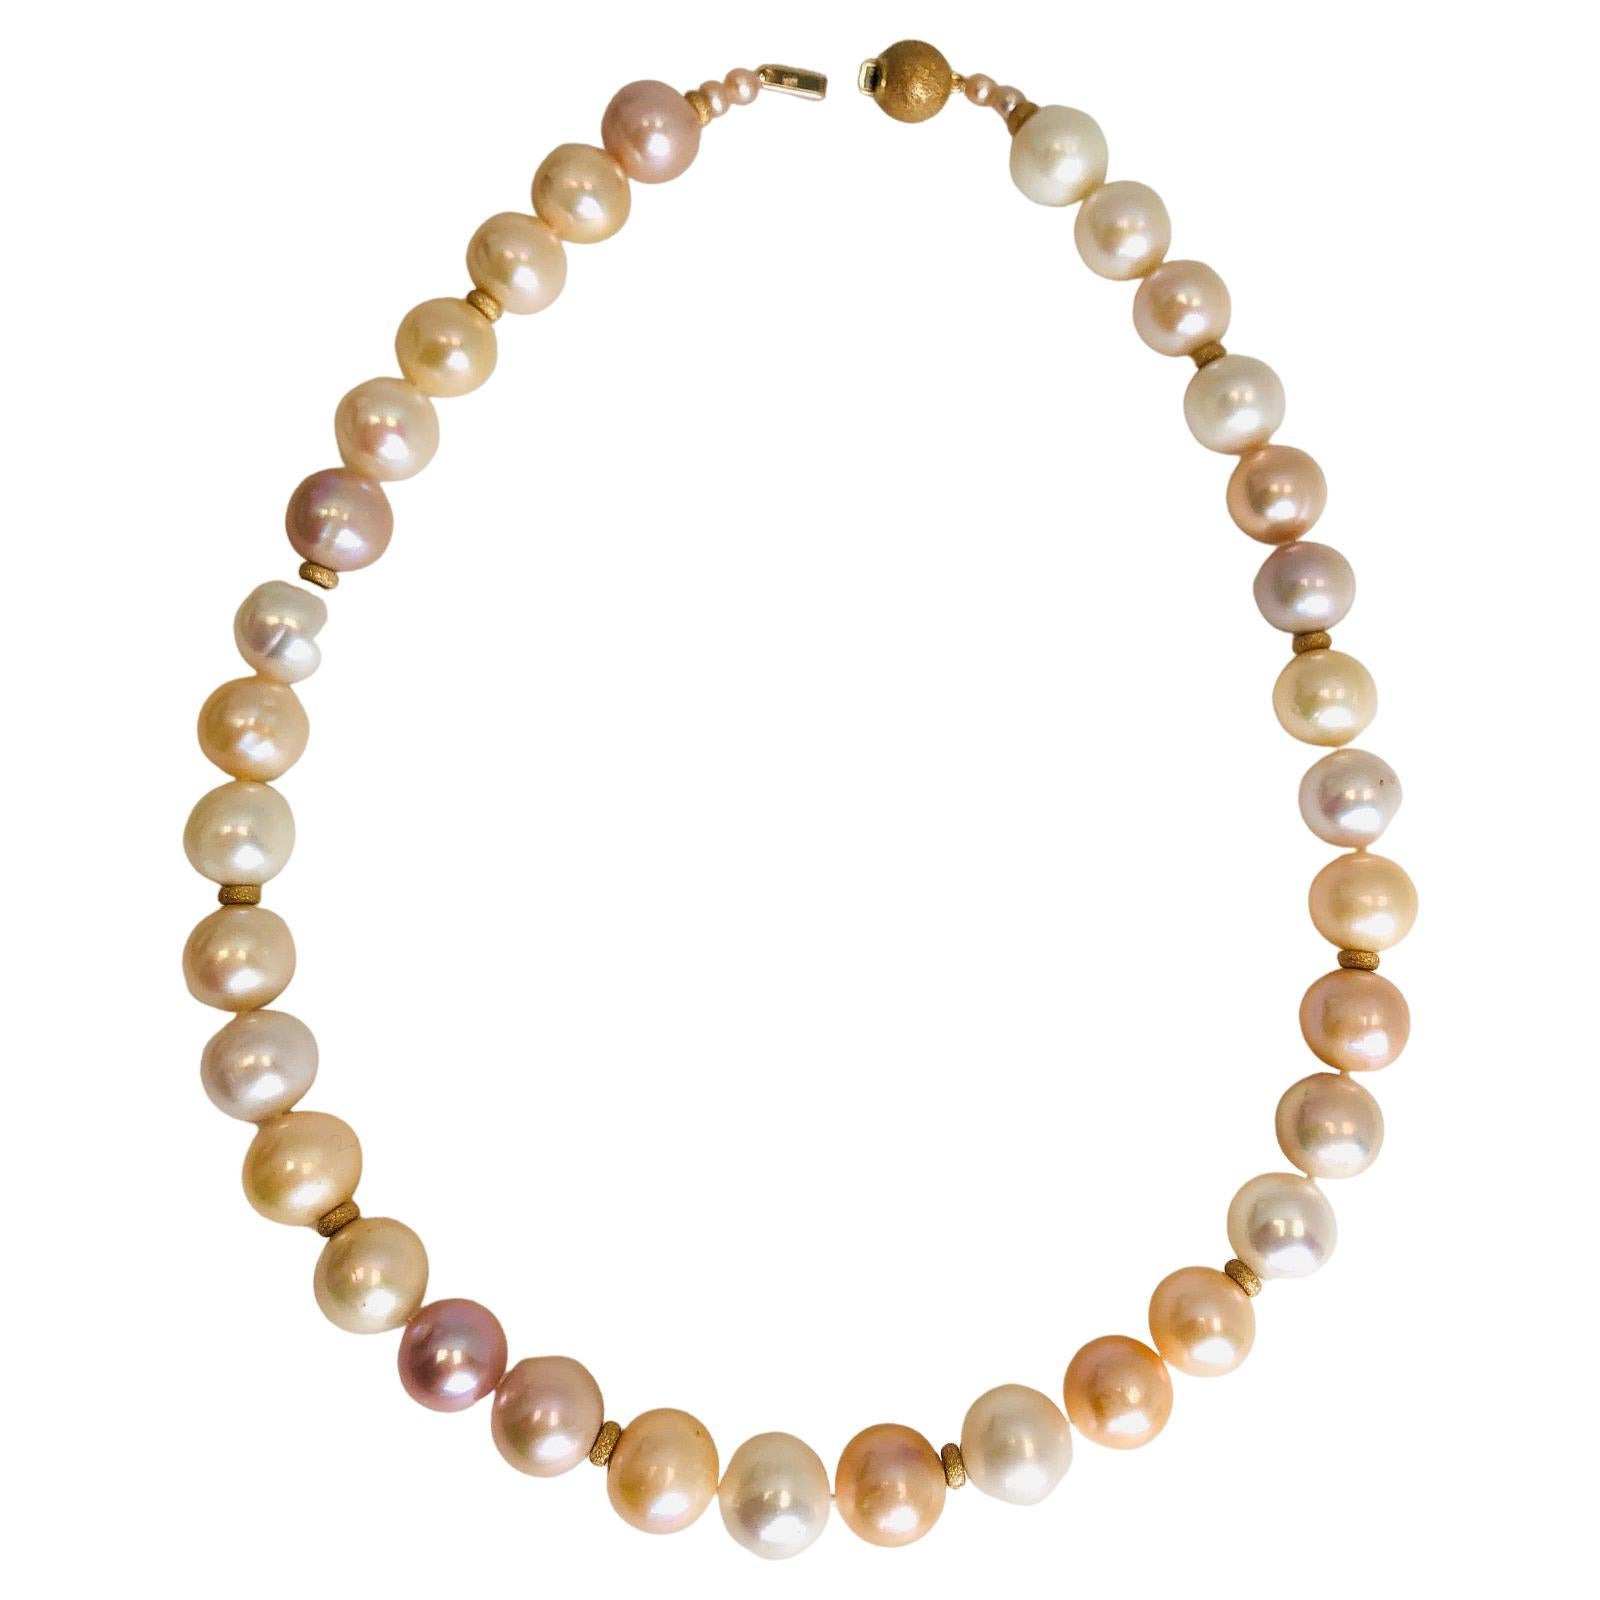 12-13mm Peach Freshwater Pearl Necklace with 14k Yellow Gold Accents For Sale